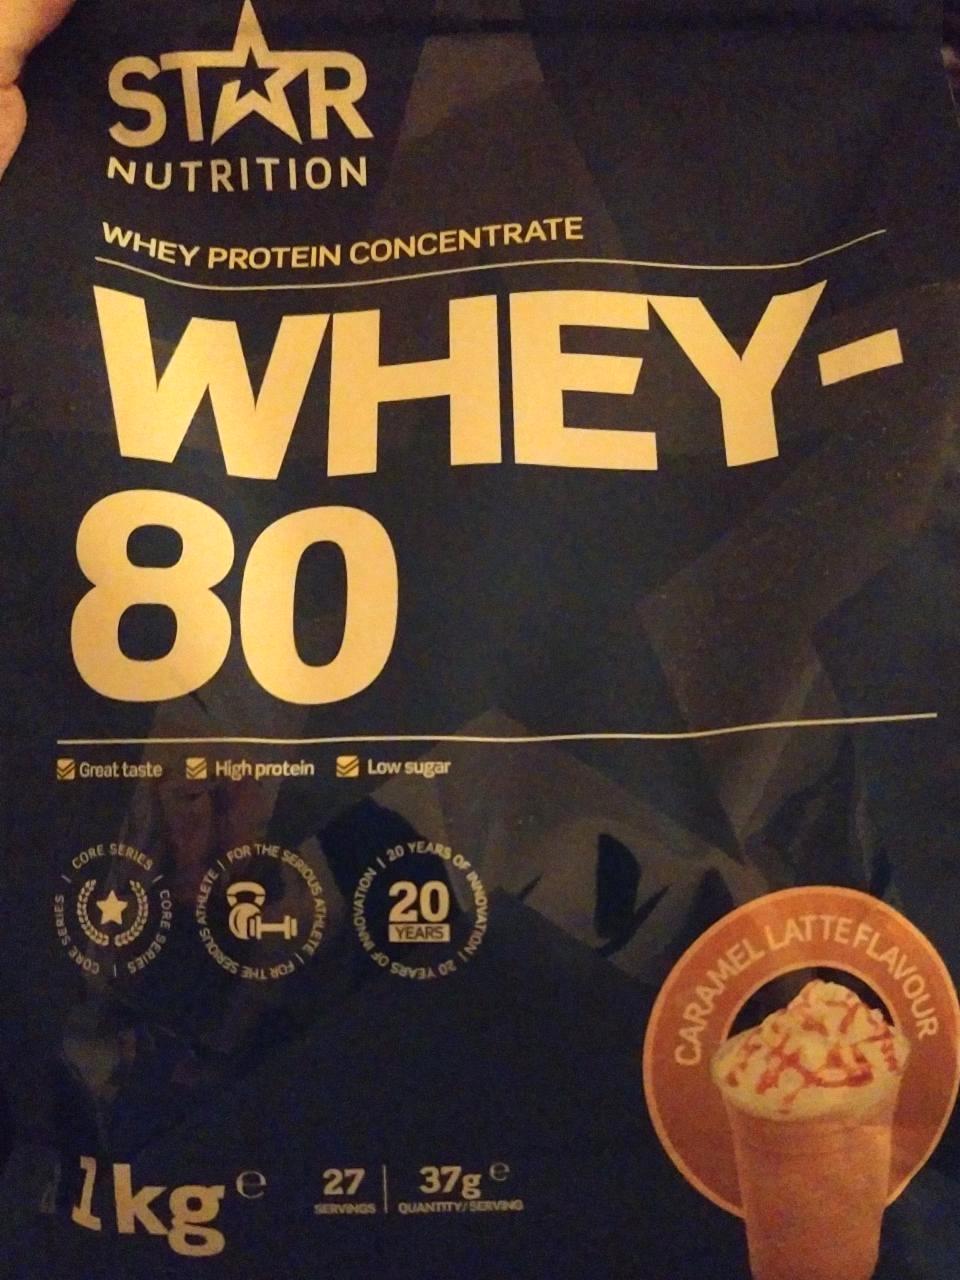 Képek - Whey protein concentrate Caramel latte flavour Star nutrition